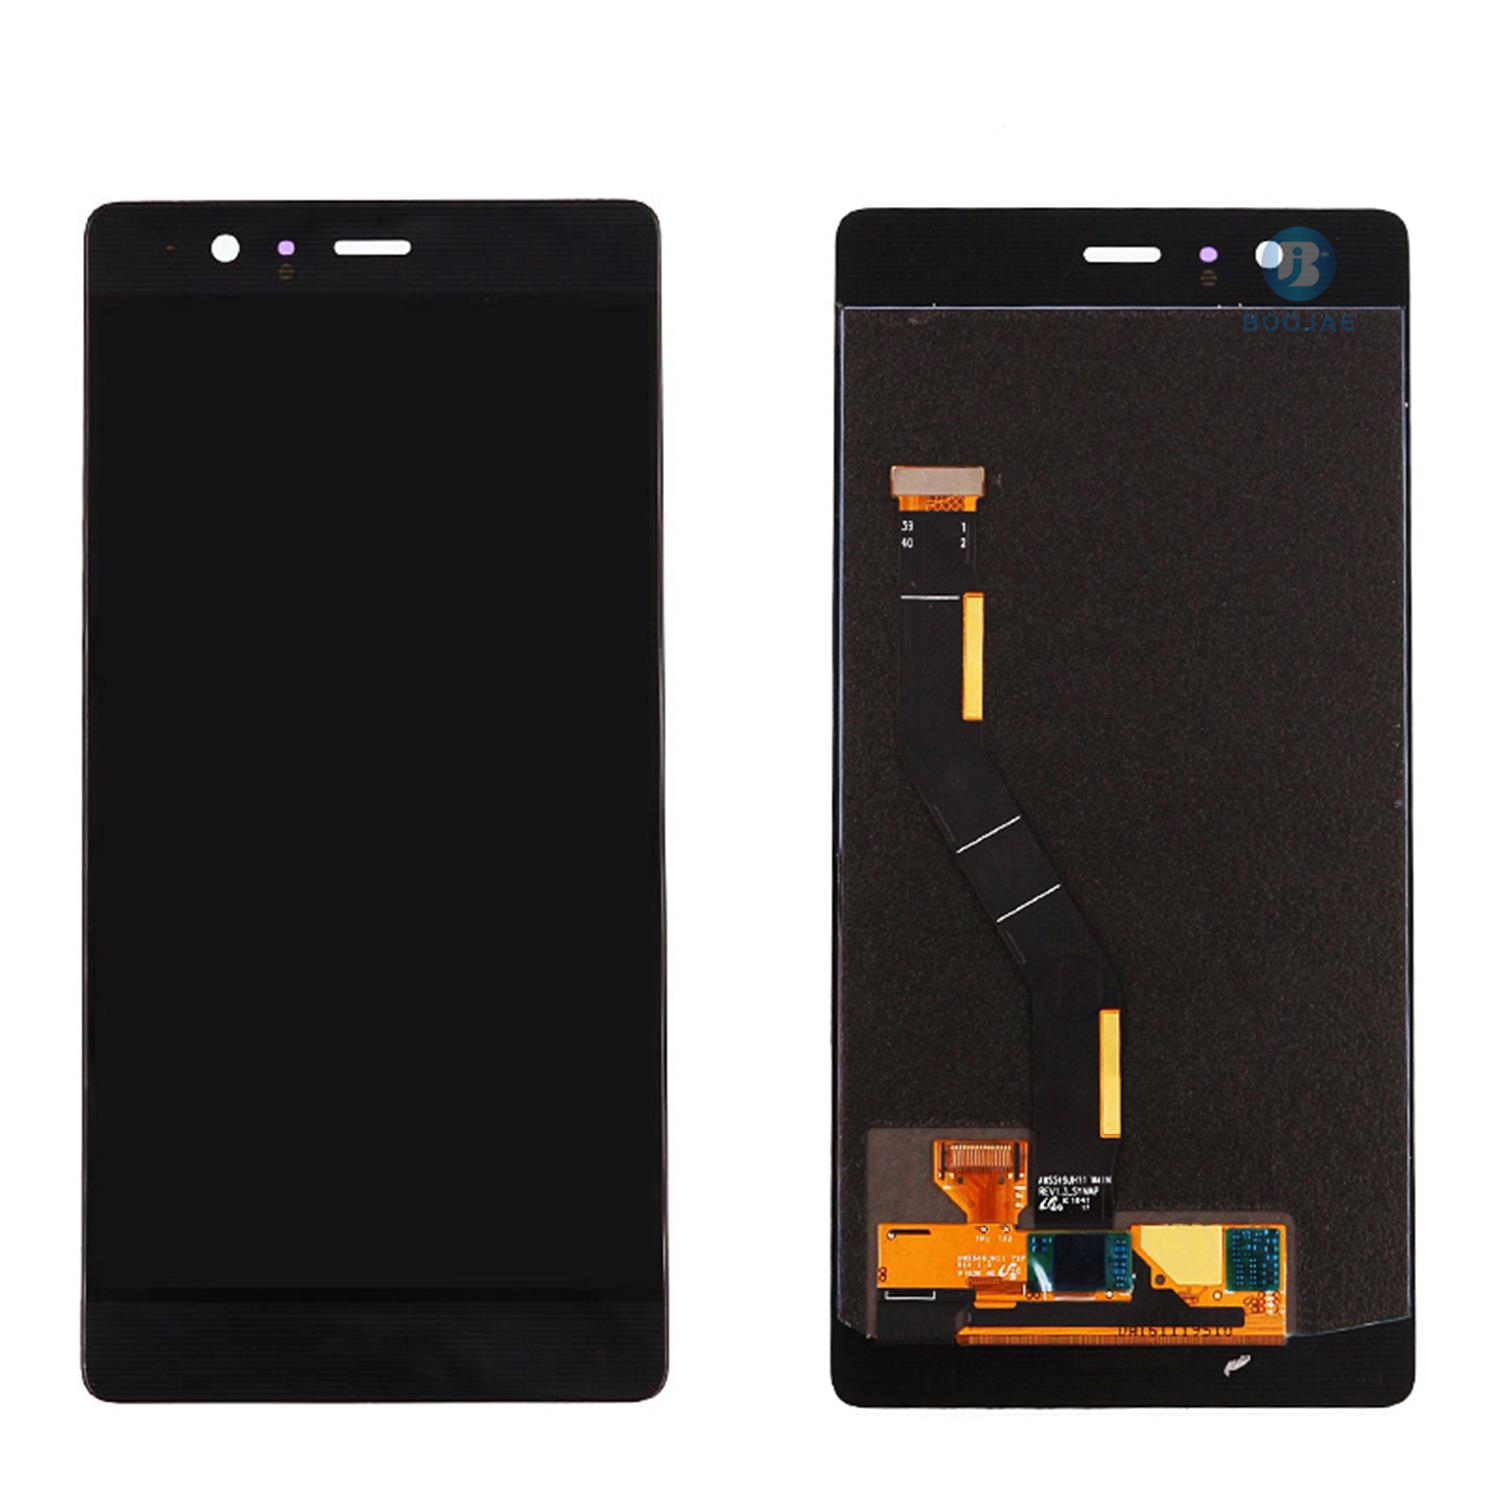 Huawei P9 Plus LCD Screen Display and Touch Panel Digitizer Assembly Replacement